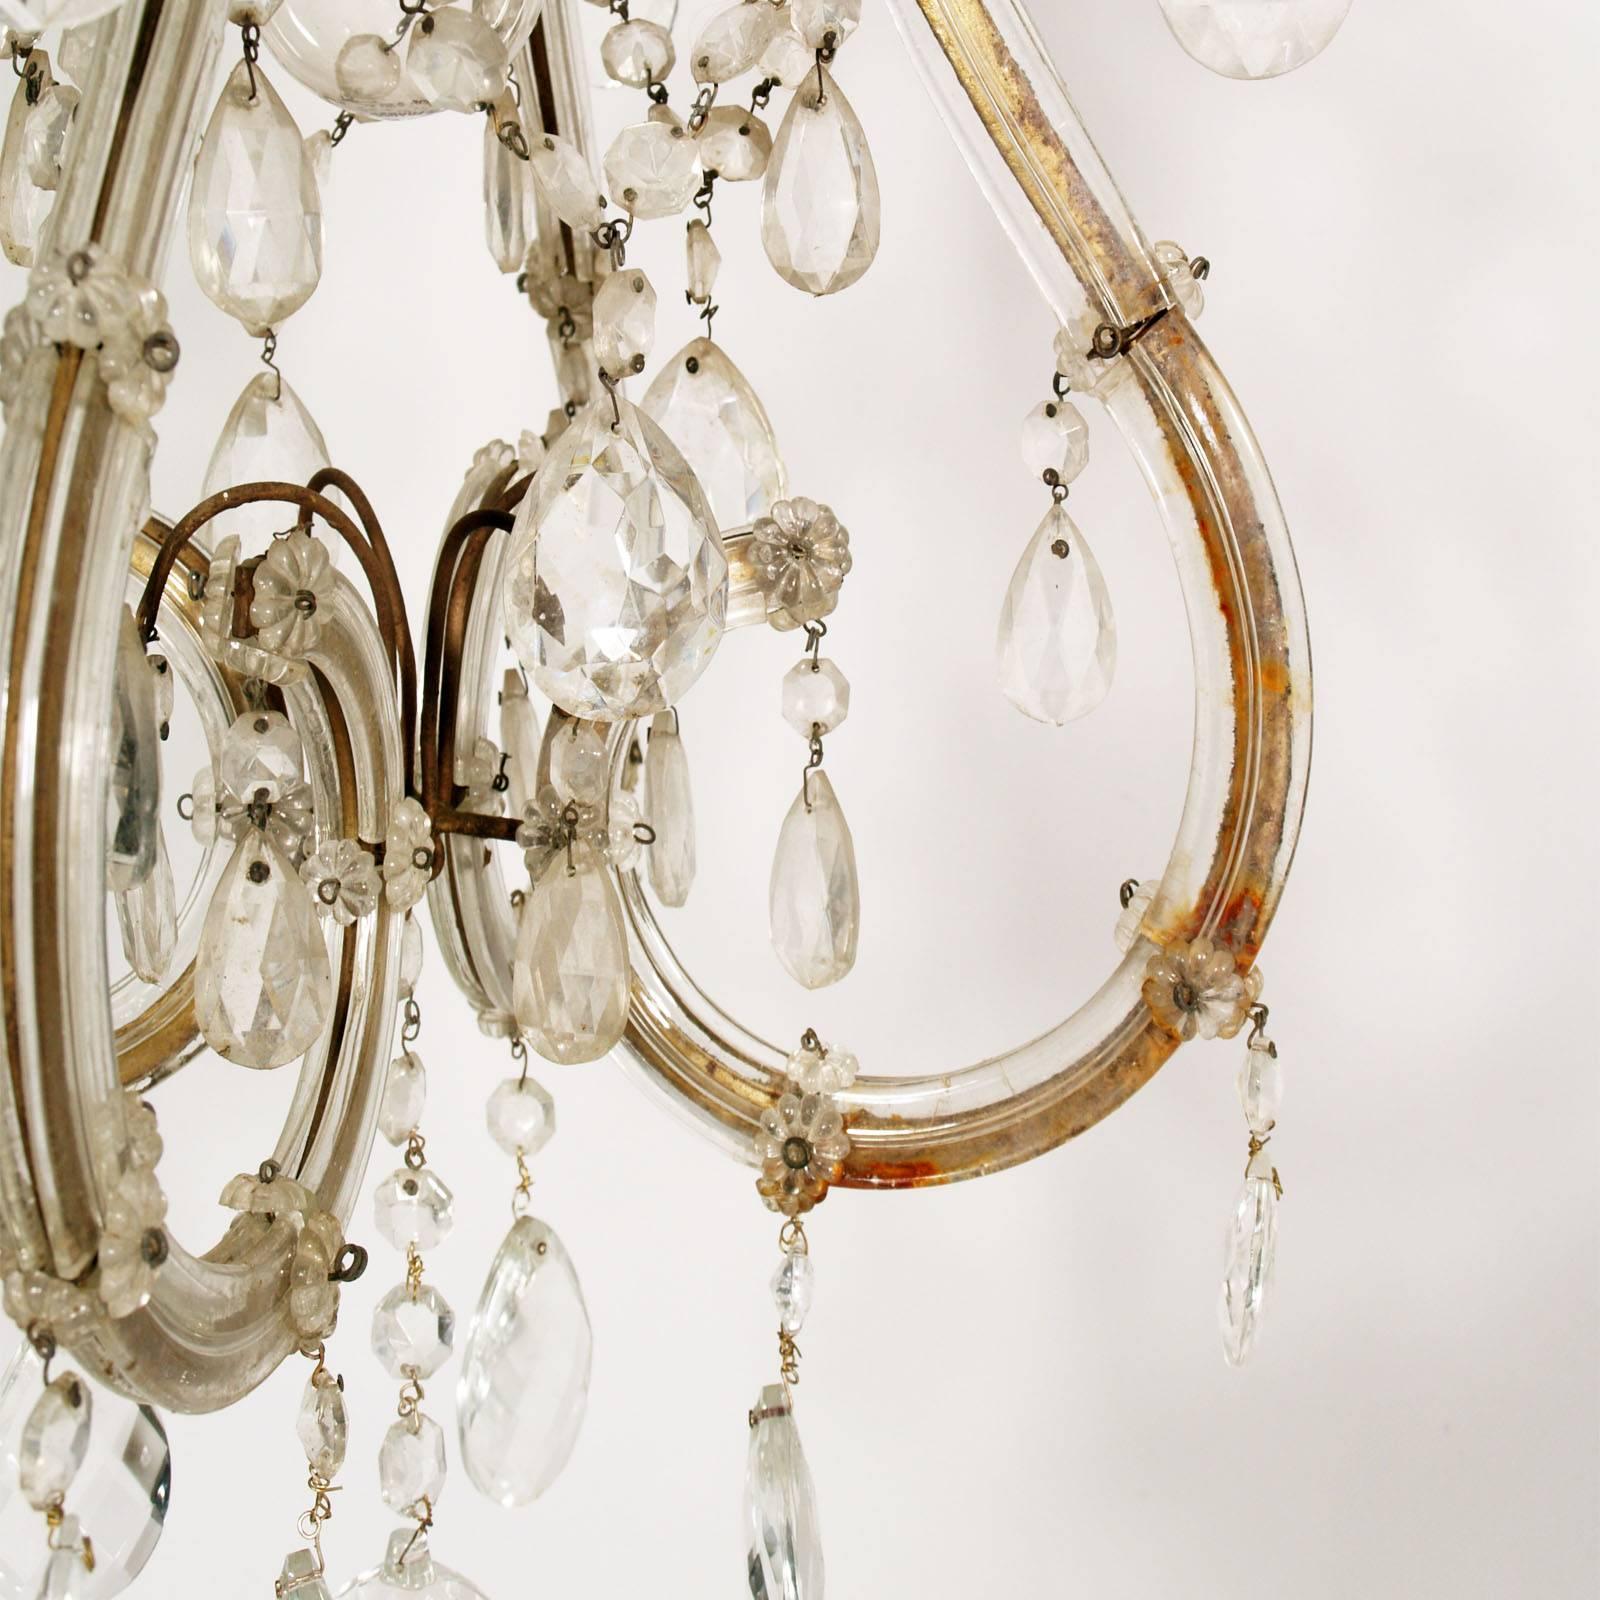 Italian 1910s Murano Maria Teresa Chandelier by Salviati with Restored Electrical System